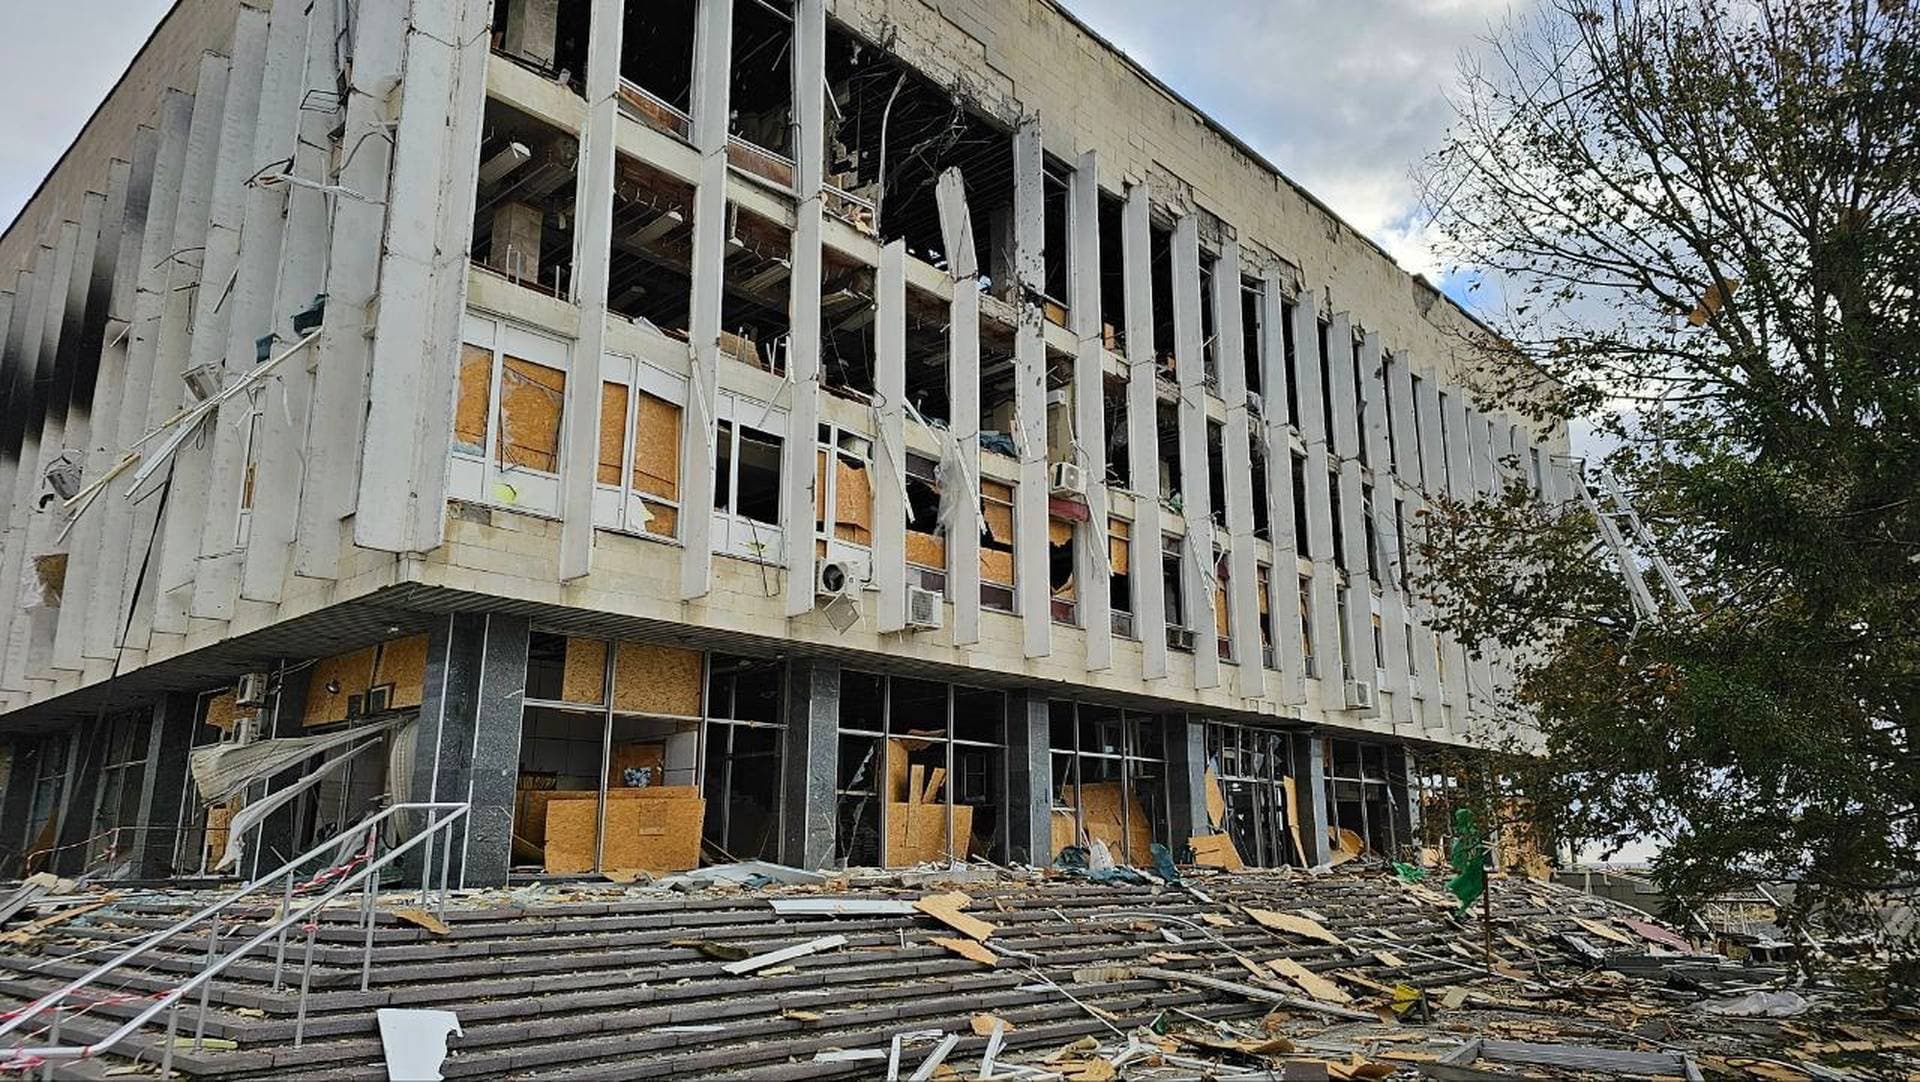 The Honchar Regional Library in Kherson has been badly damaged after a Russian air strike on the city